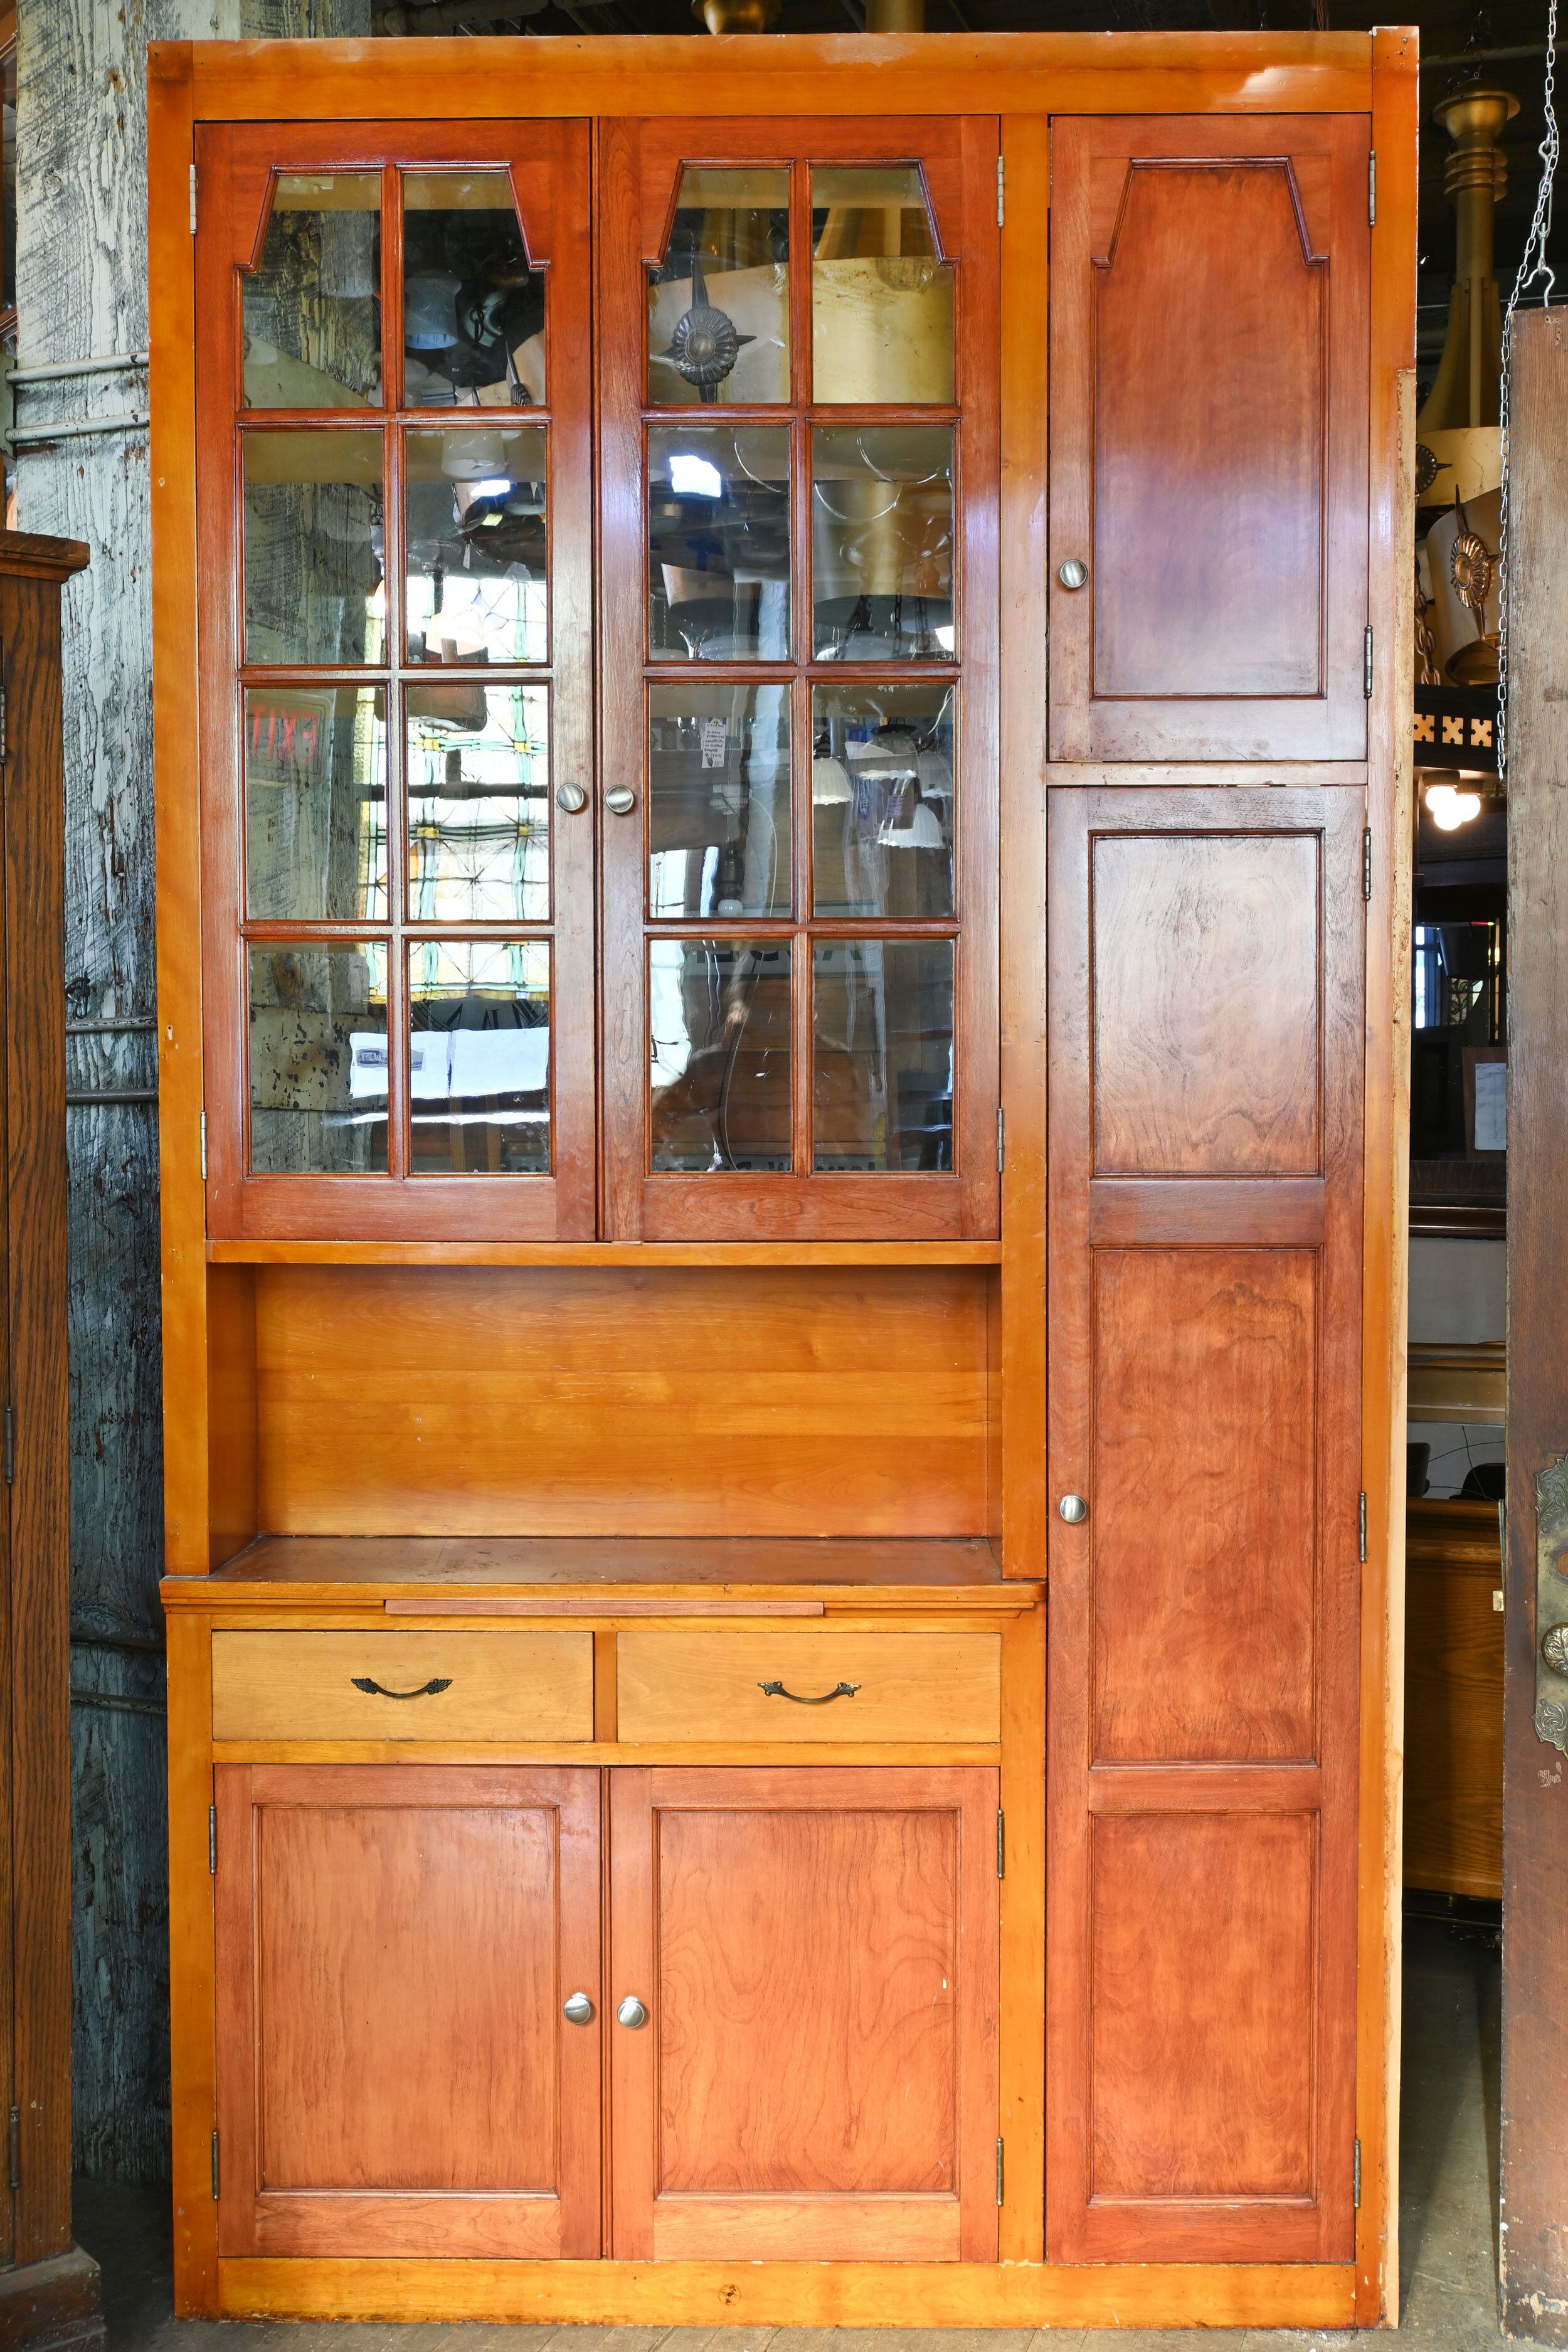 birch kitchen cabinet unit with tall broom closet — ARCHITECTURAL ANTIQUES